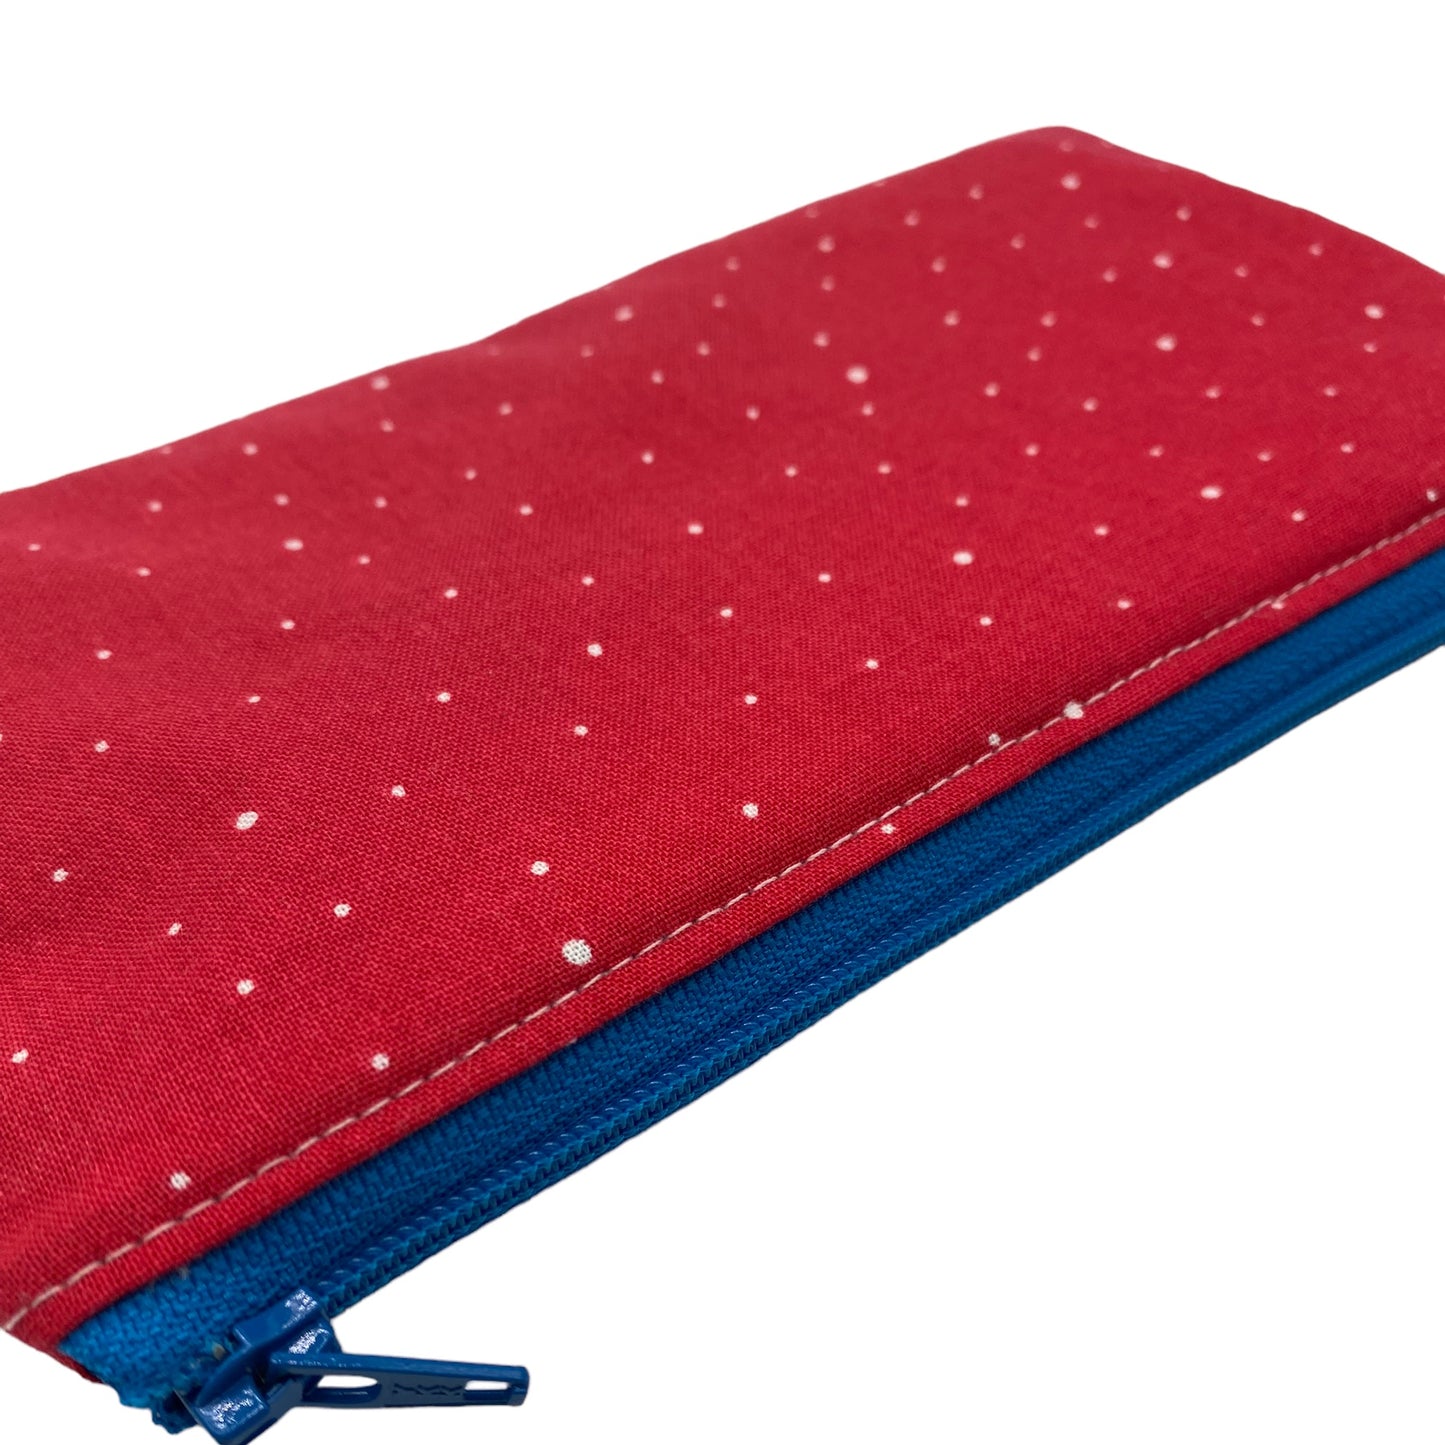 Knick Knack Sized Reusable Zippered Bag Dots on Red